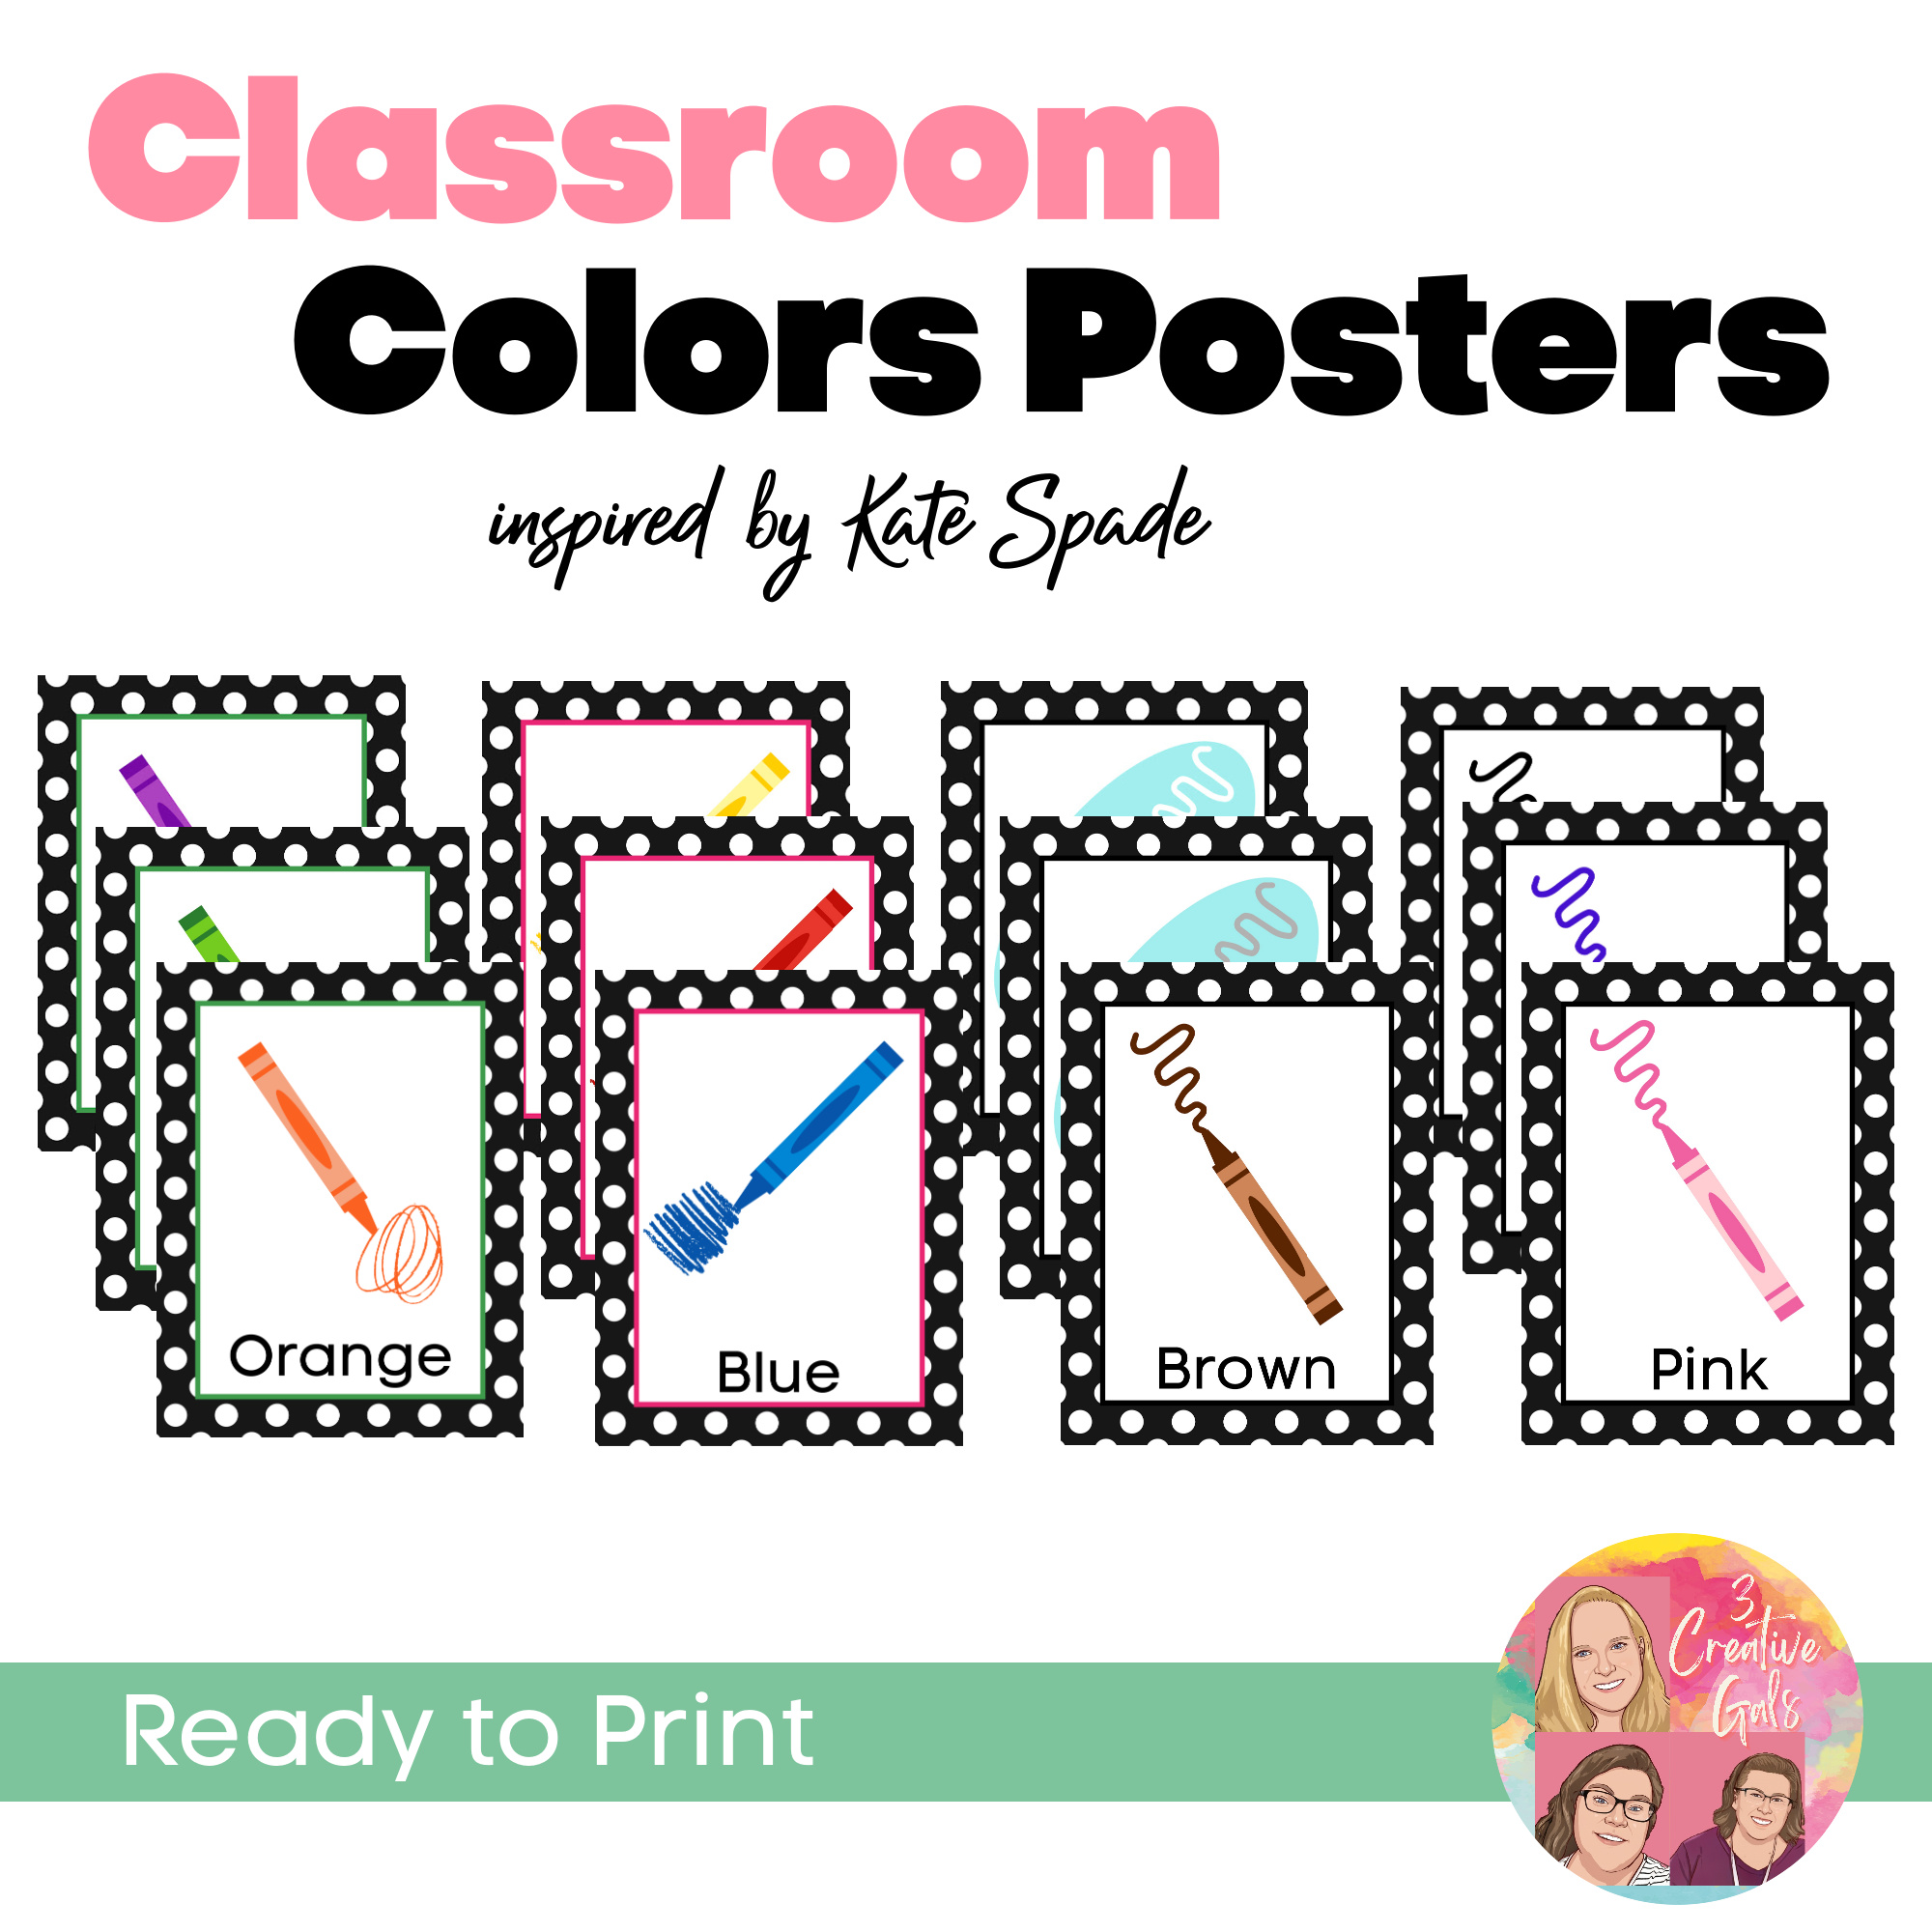 Colors Posters | inspired by Kate Spade